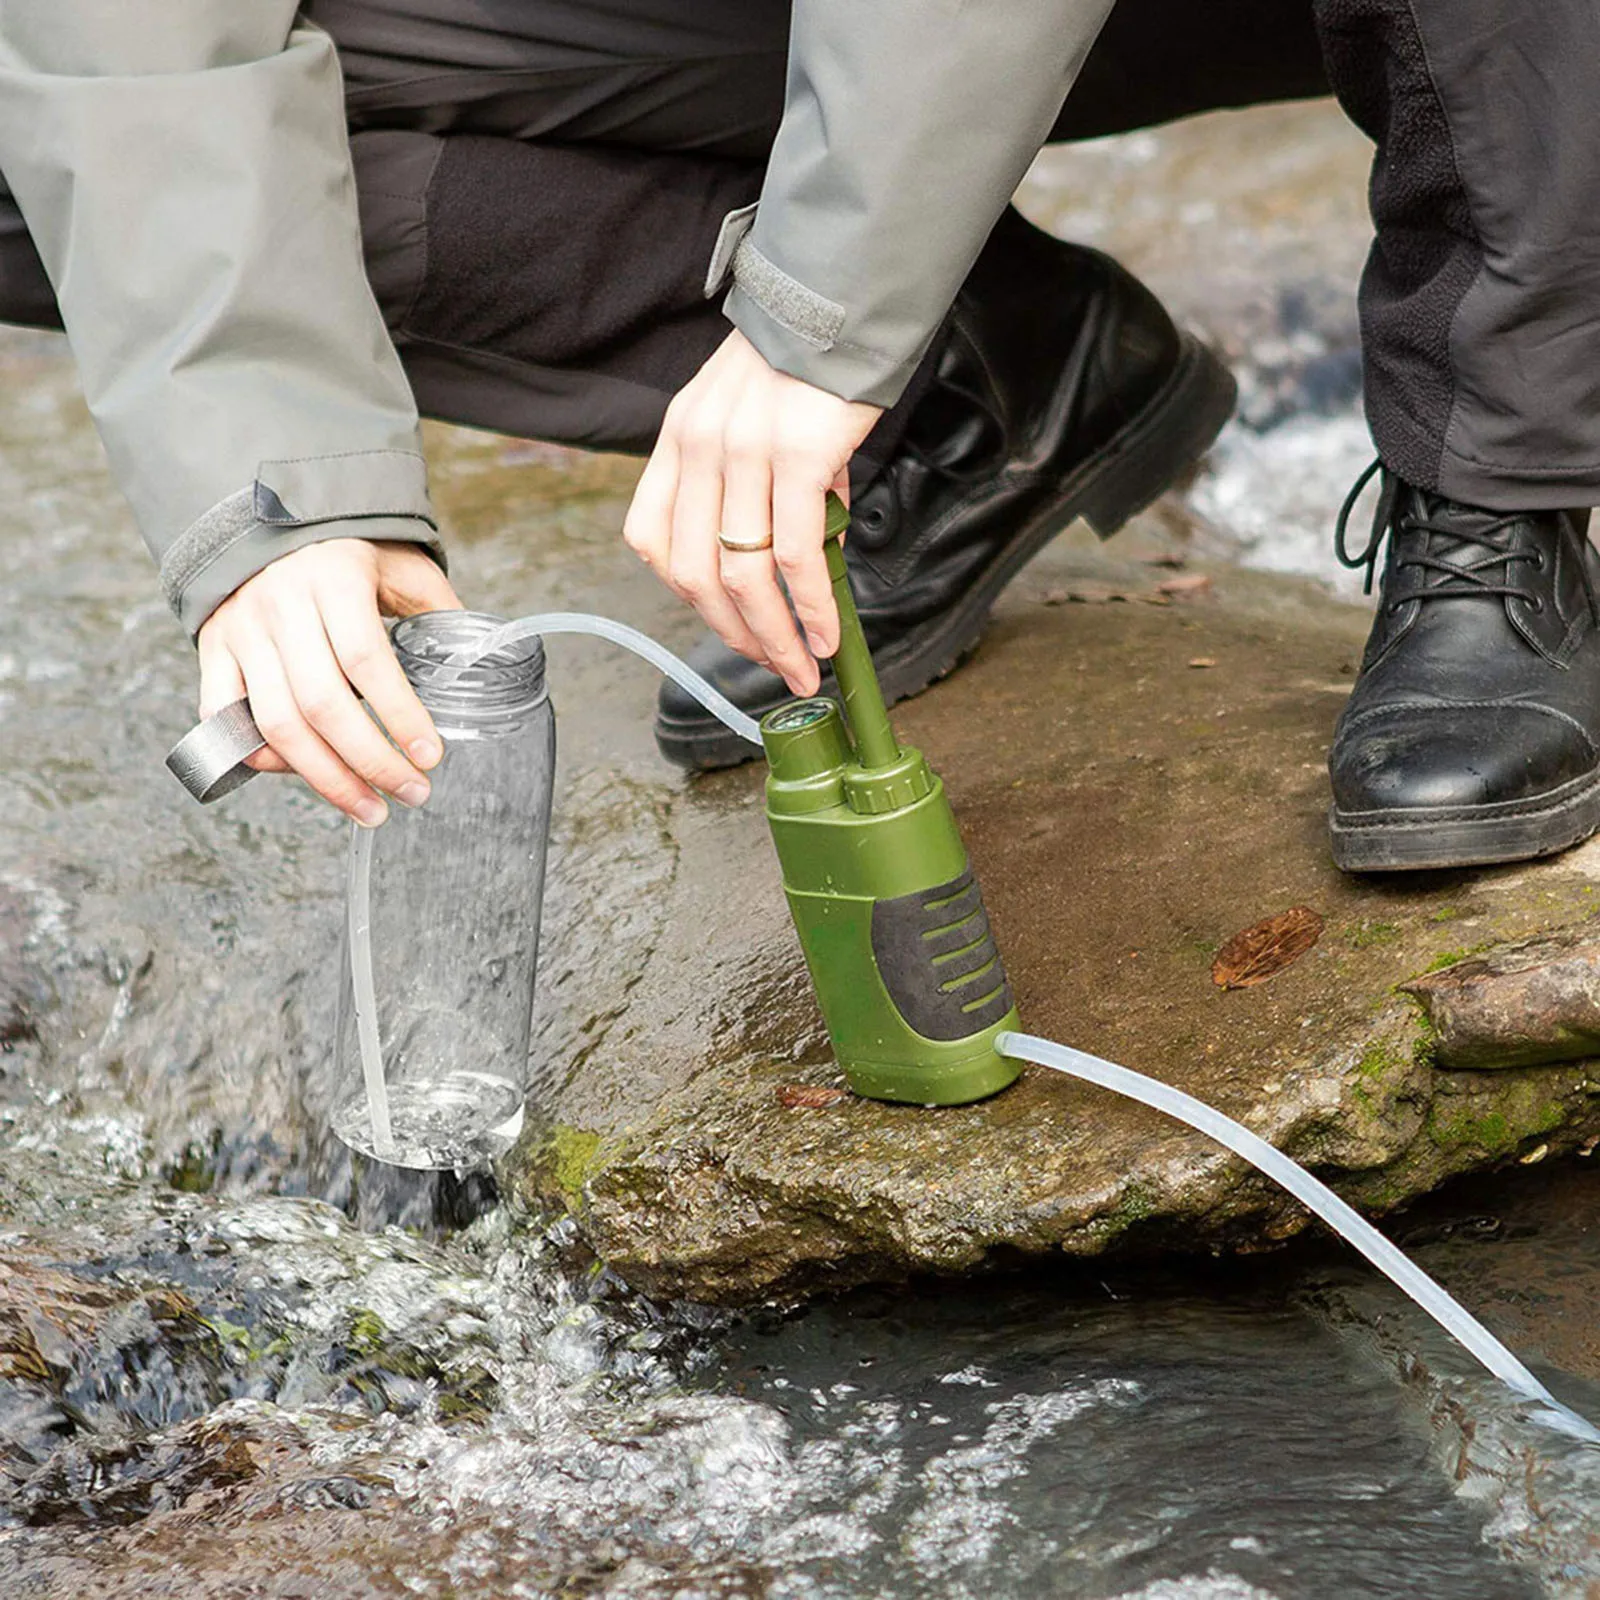 Outdoor Survival Water Filter Personal Purifier Filtration Emergency Gear,